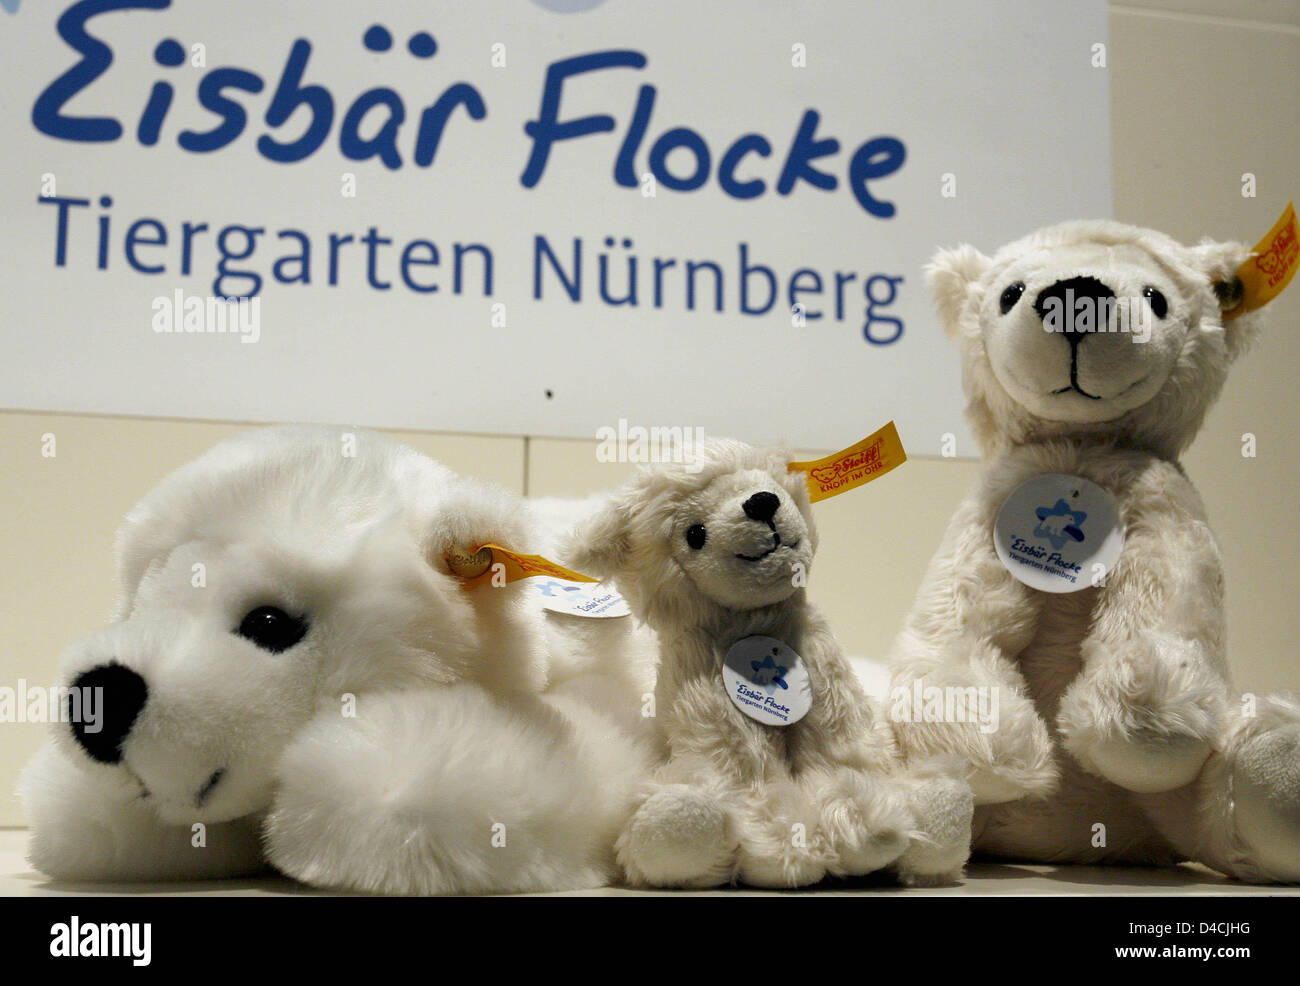 Stuffed toys producer Steiff presents the officially licensed stuffed toy  of Nuremberg zoo's polar bear cub 'Flocke' at the International Toy Fair  Nuremberg, Germany, 07 February 2008. A total of 2,700 exhibitors